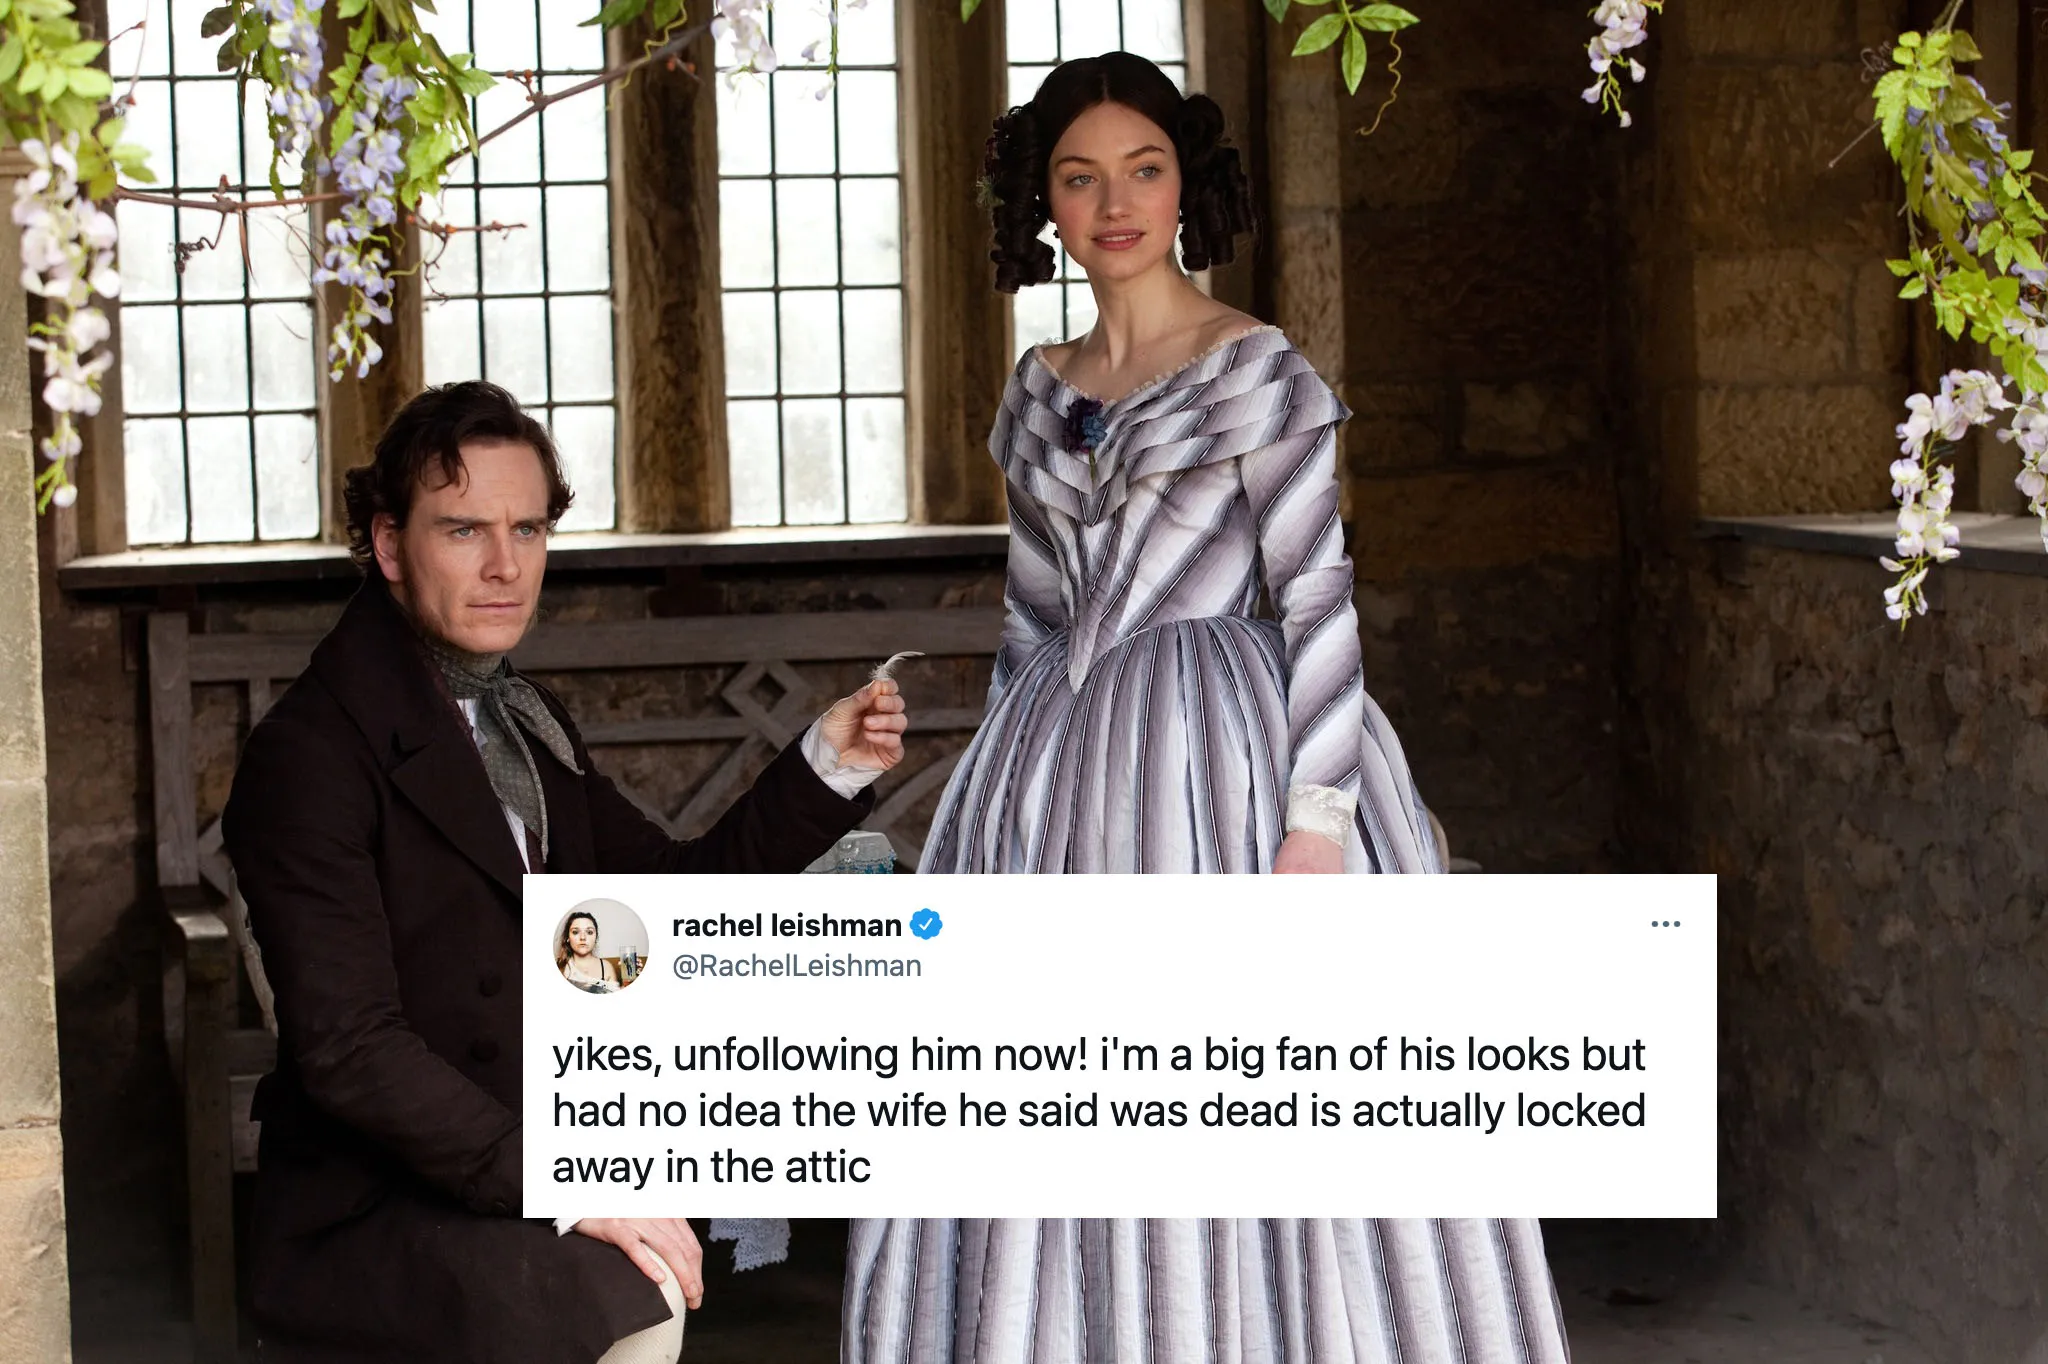 Michael Fassbender and Imogen Poots in Jane Eyre, with the text "yikes, unfollowing him now! i'm a big fan of his looks but had no idea the wife he said was dead is actually locked away in the attic."